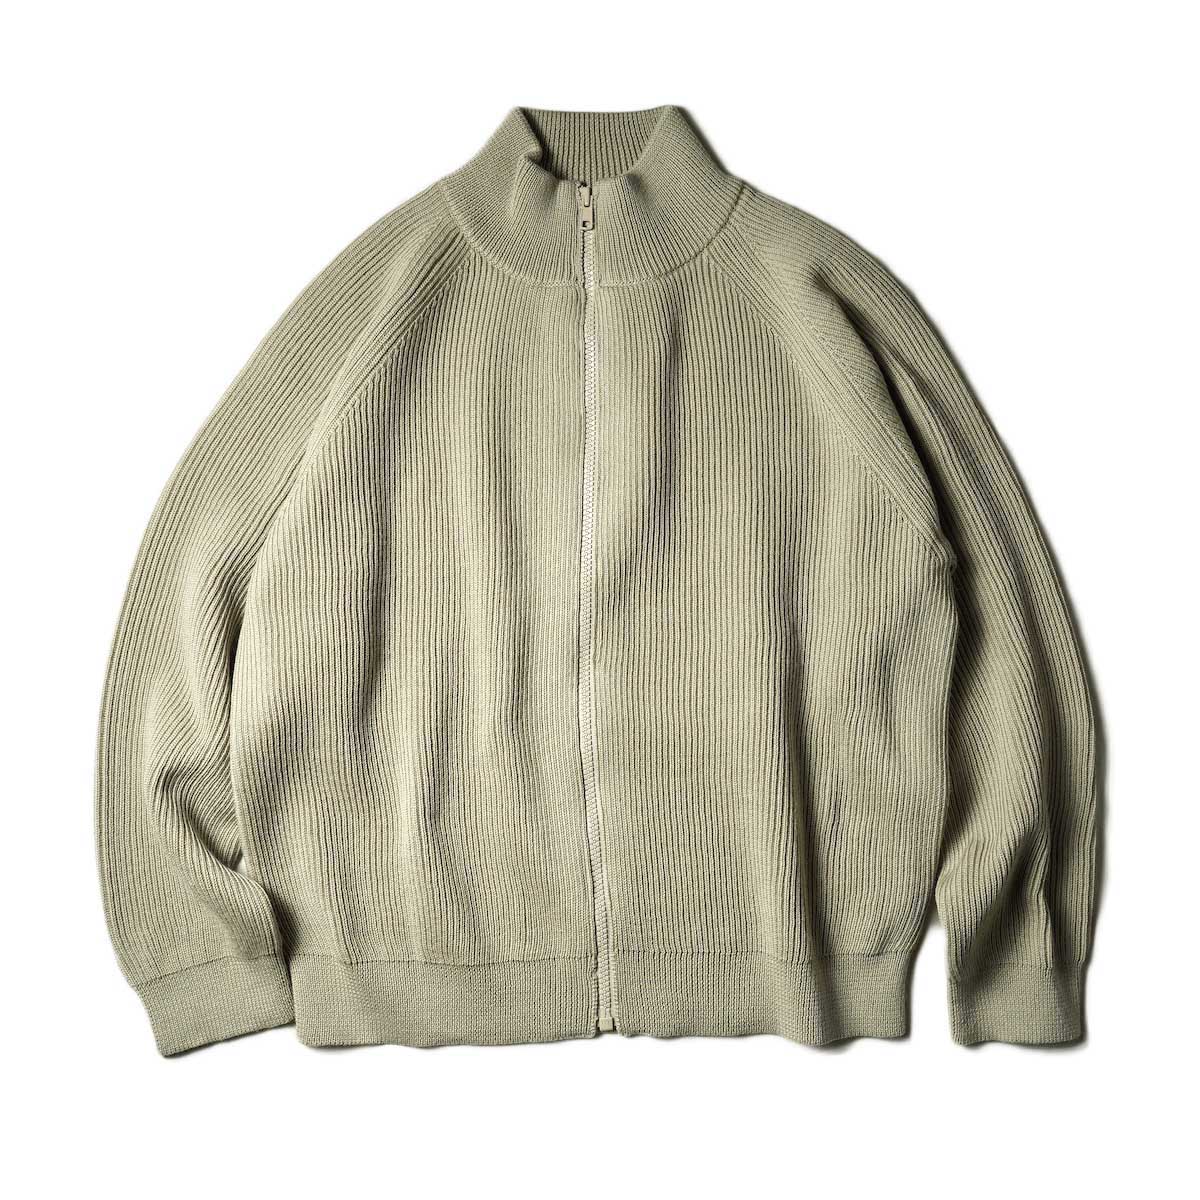 EVCON / DRIVERS SWEATER (Oatmeal)